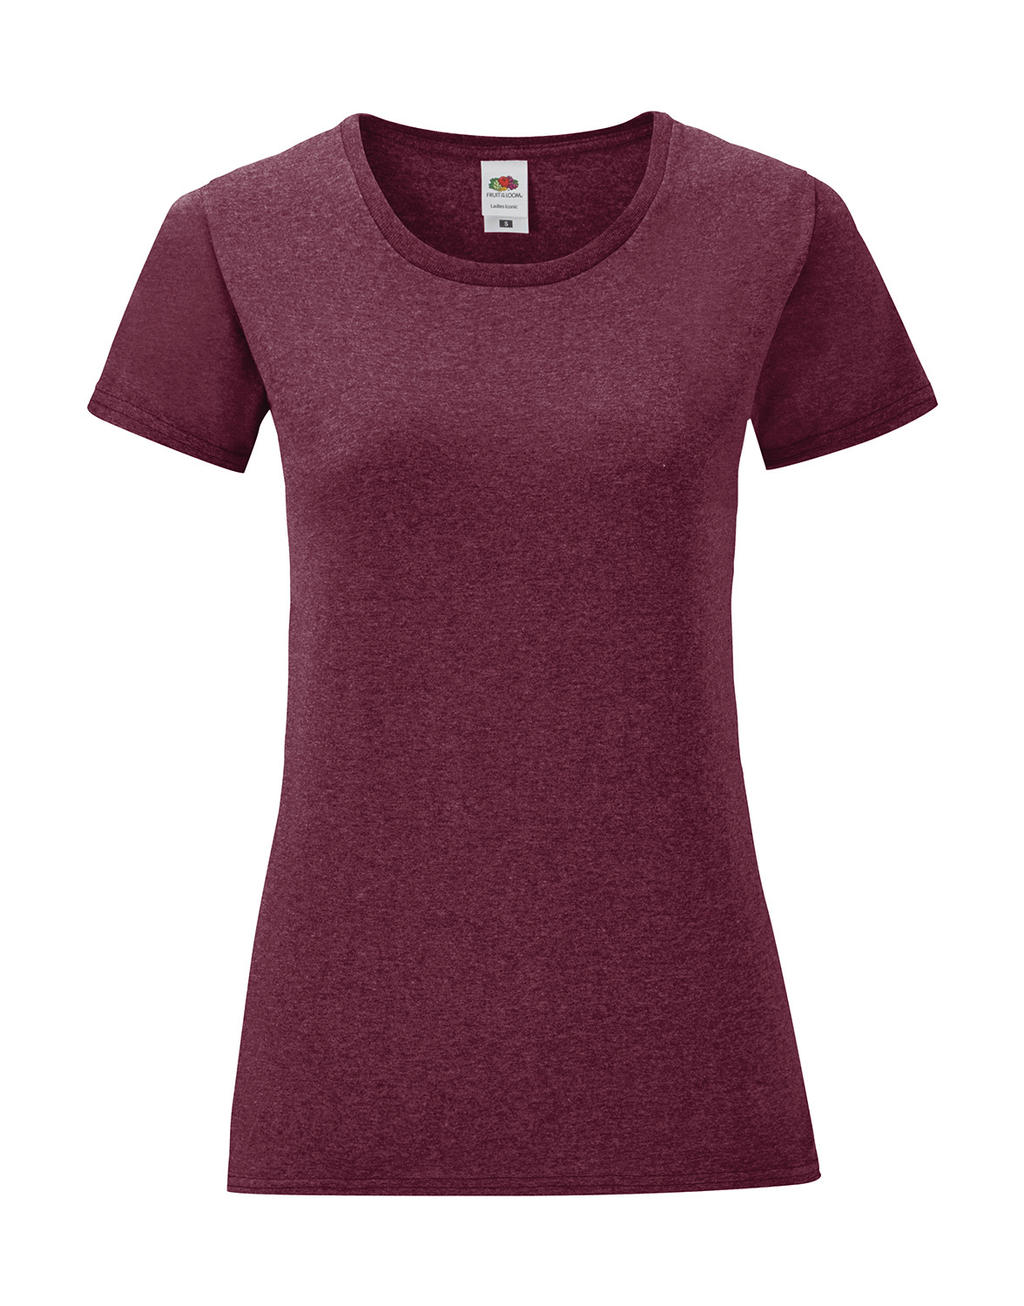  Ladies Iconic 150 T in Farbe Heather Burgundy